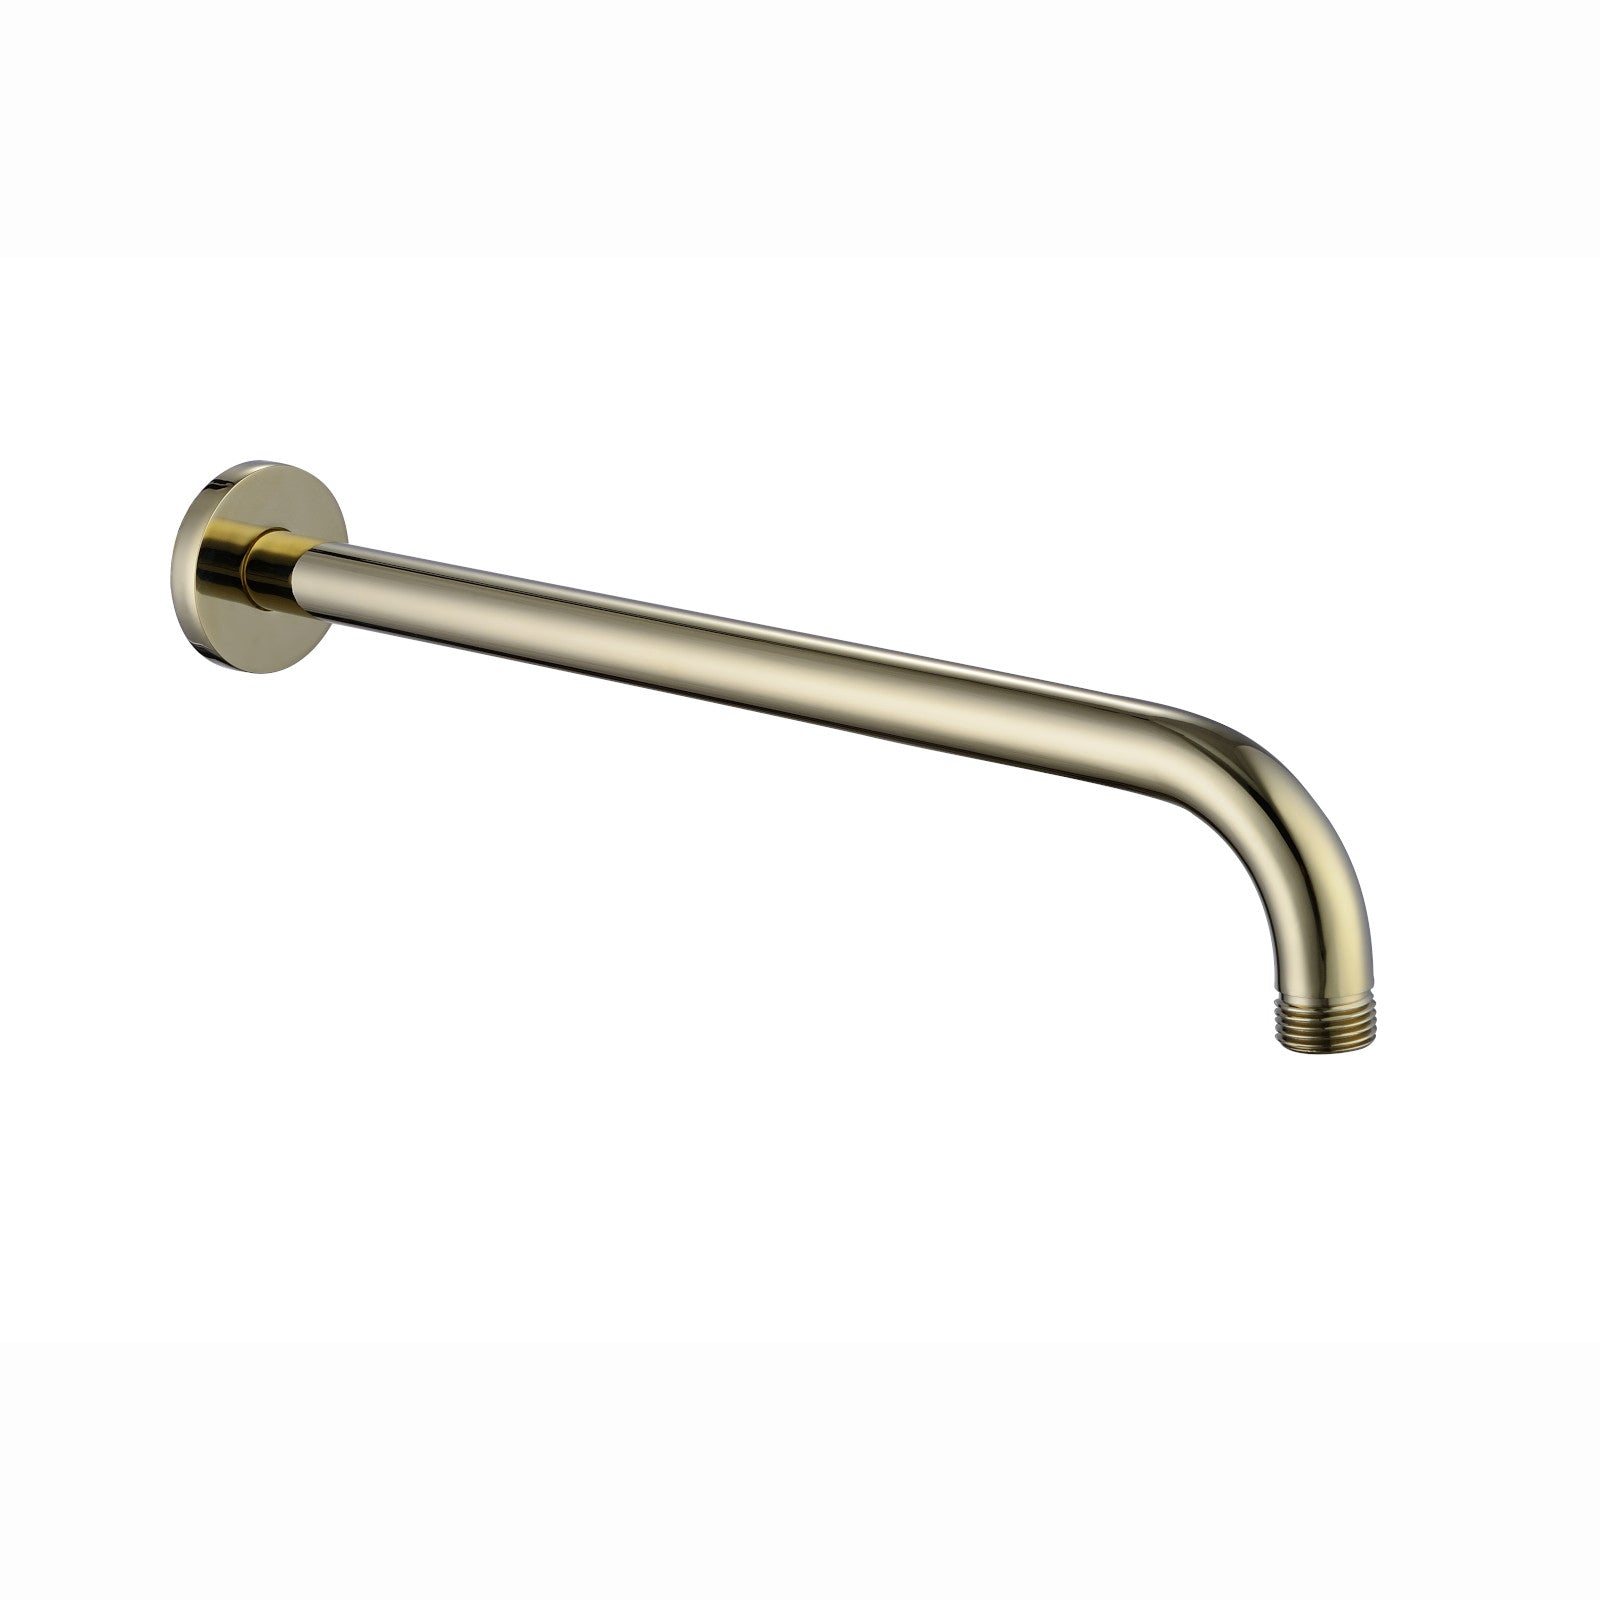 Round wall mounted shower arm 320mm - English gold - Showers